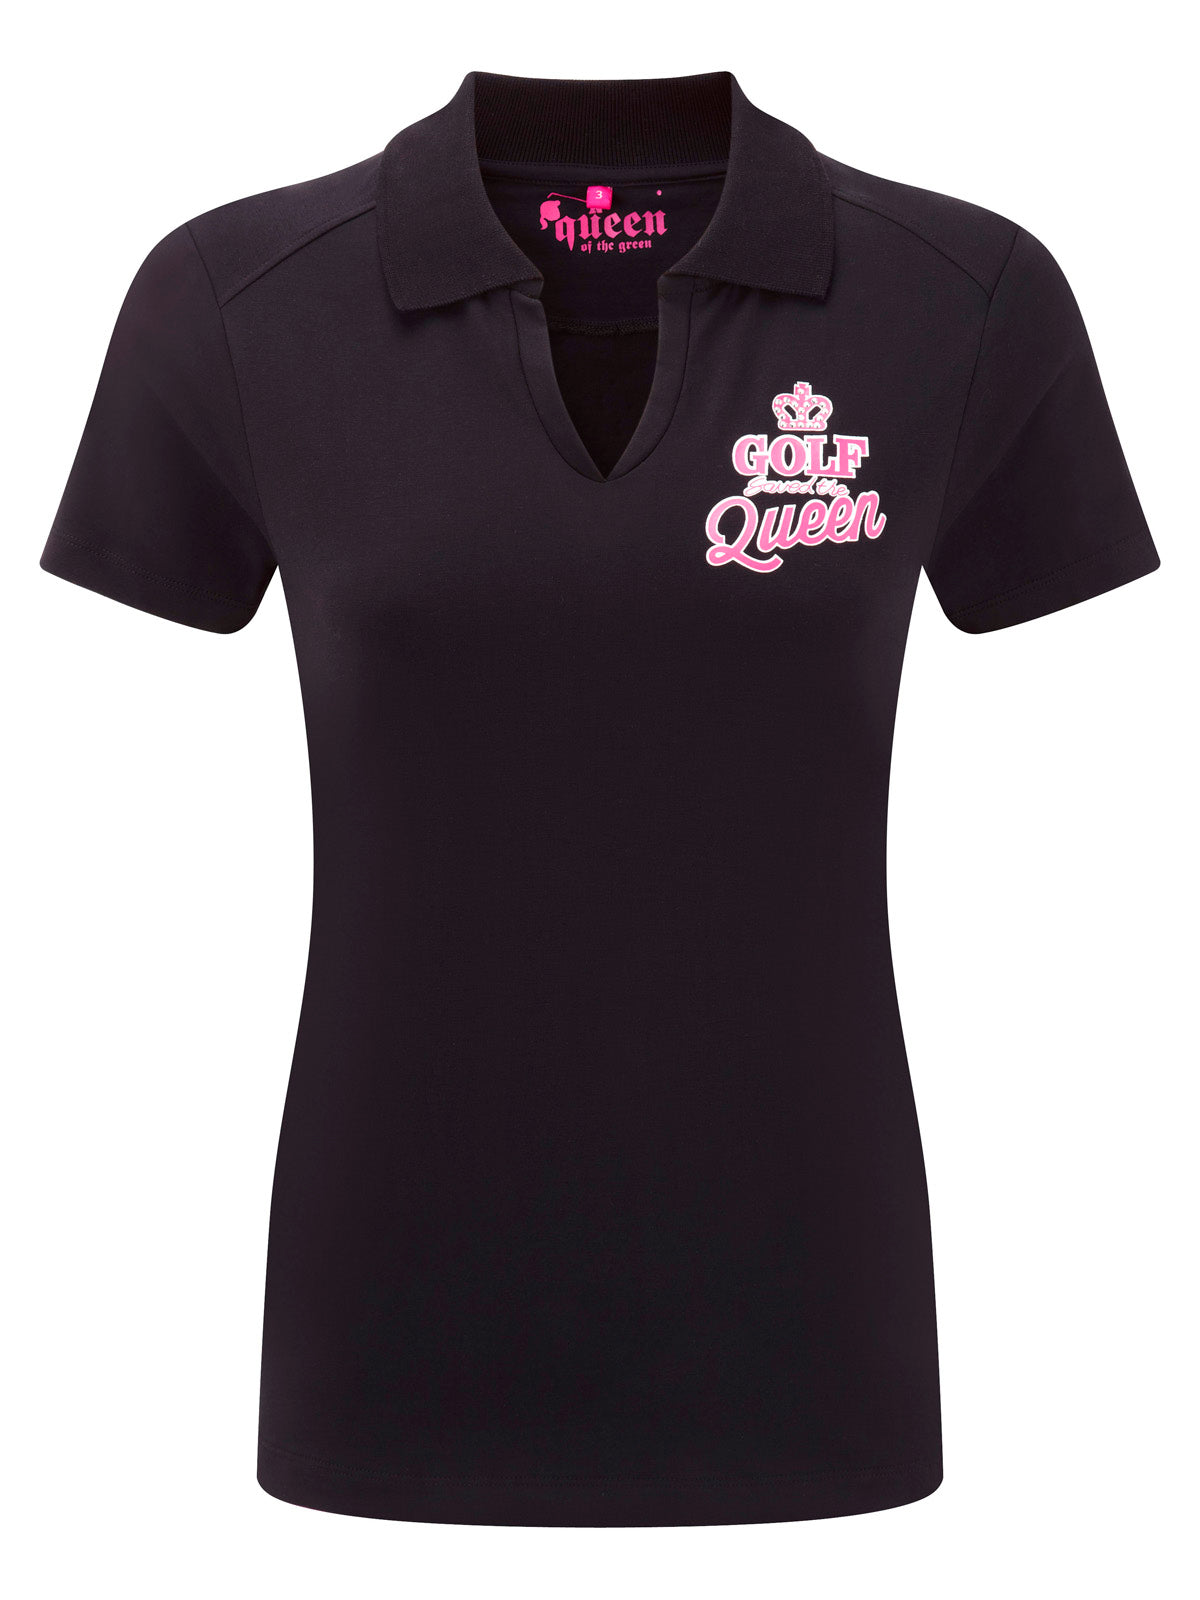 Queen of the Green Black Womens Golf Polo Shirts with Golf Saved The Queen on the front and back - Front